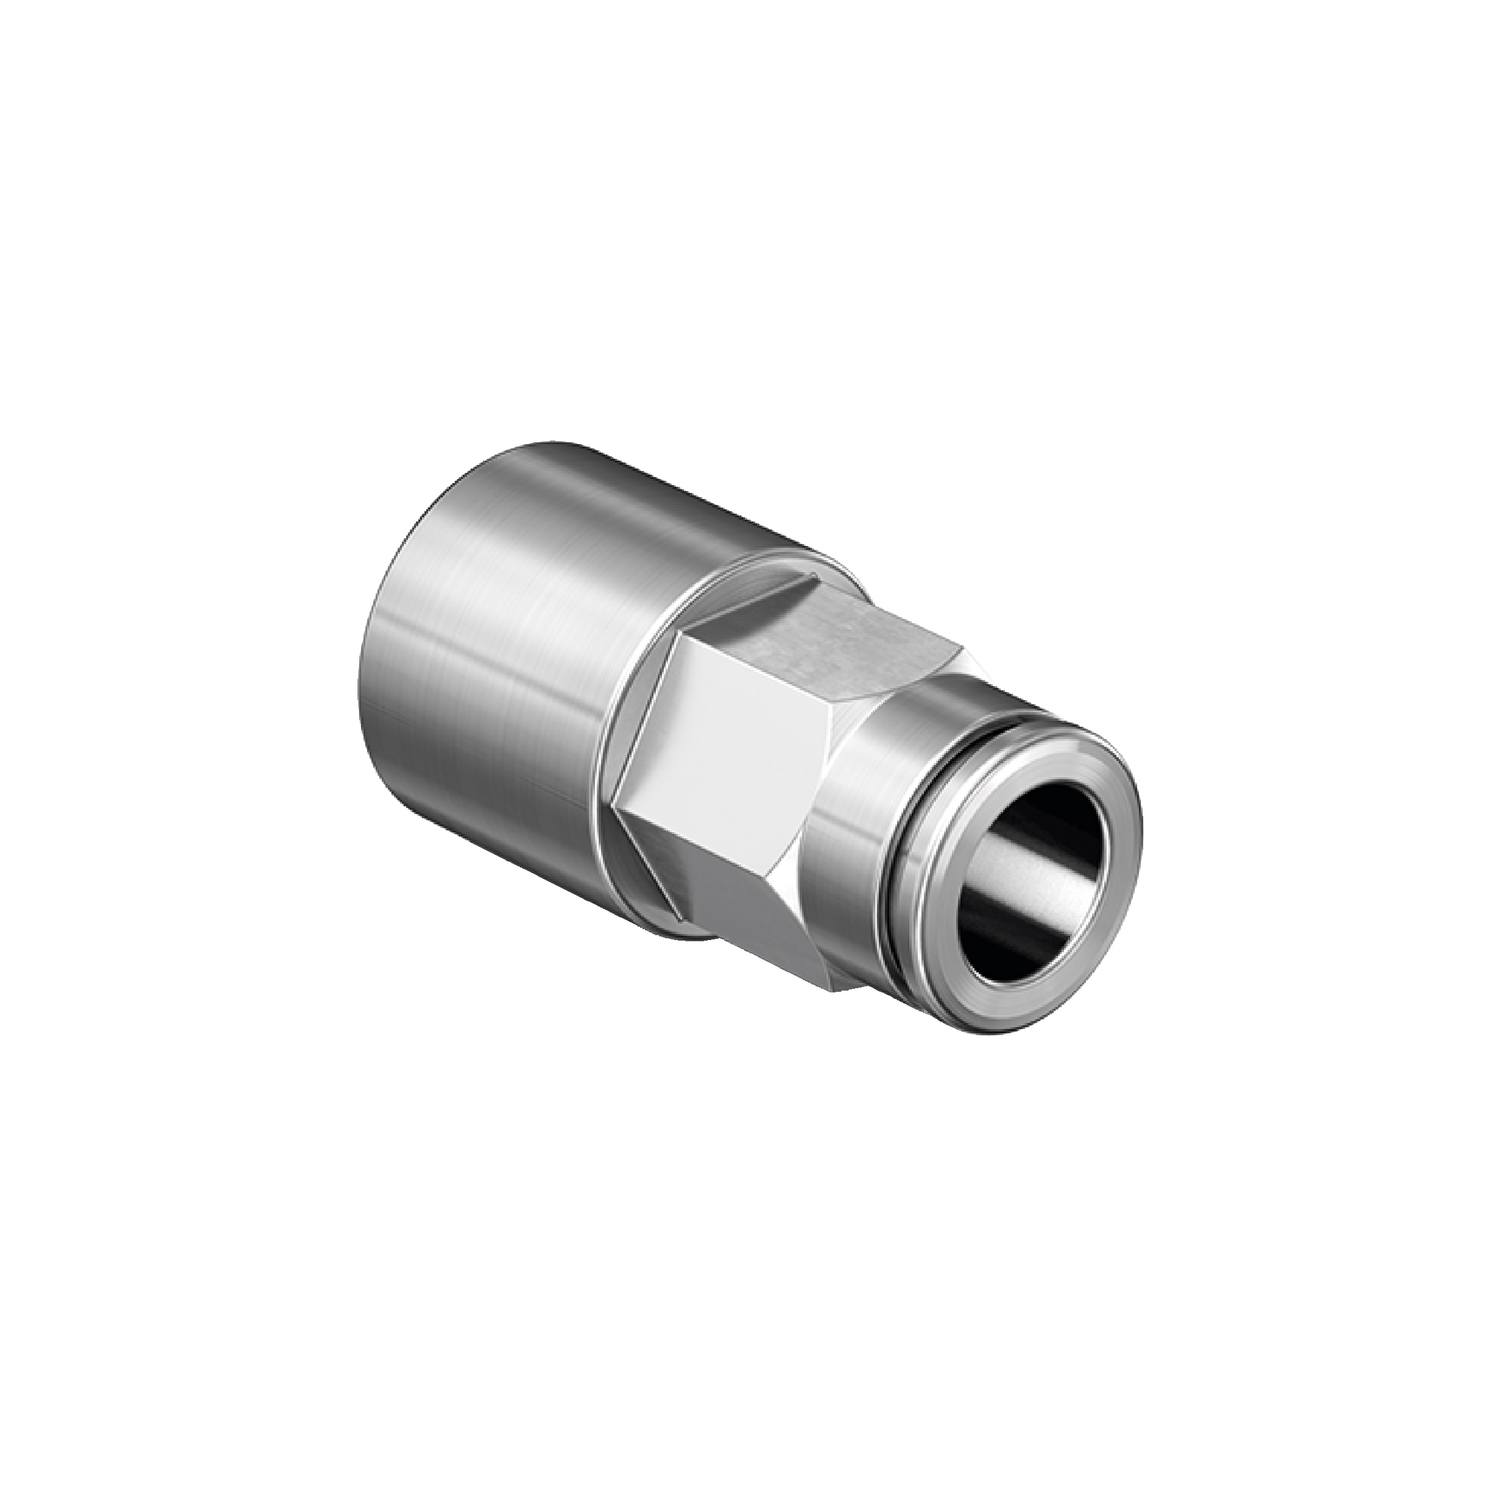 Connector for Lubricator, Hose Connection Part CONCEPT1